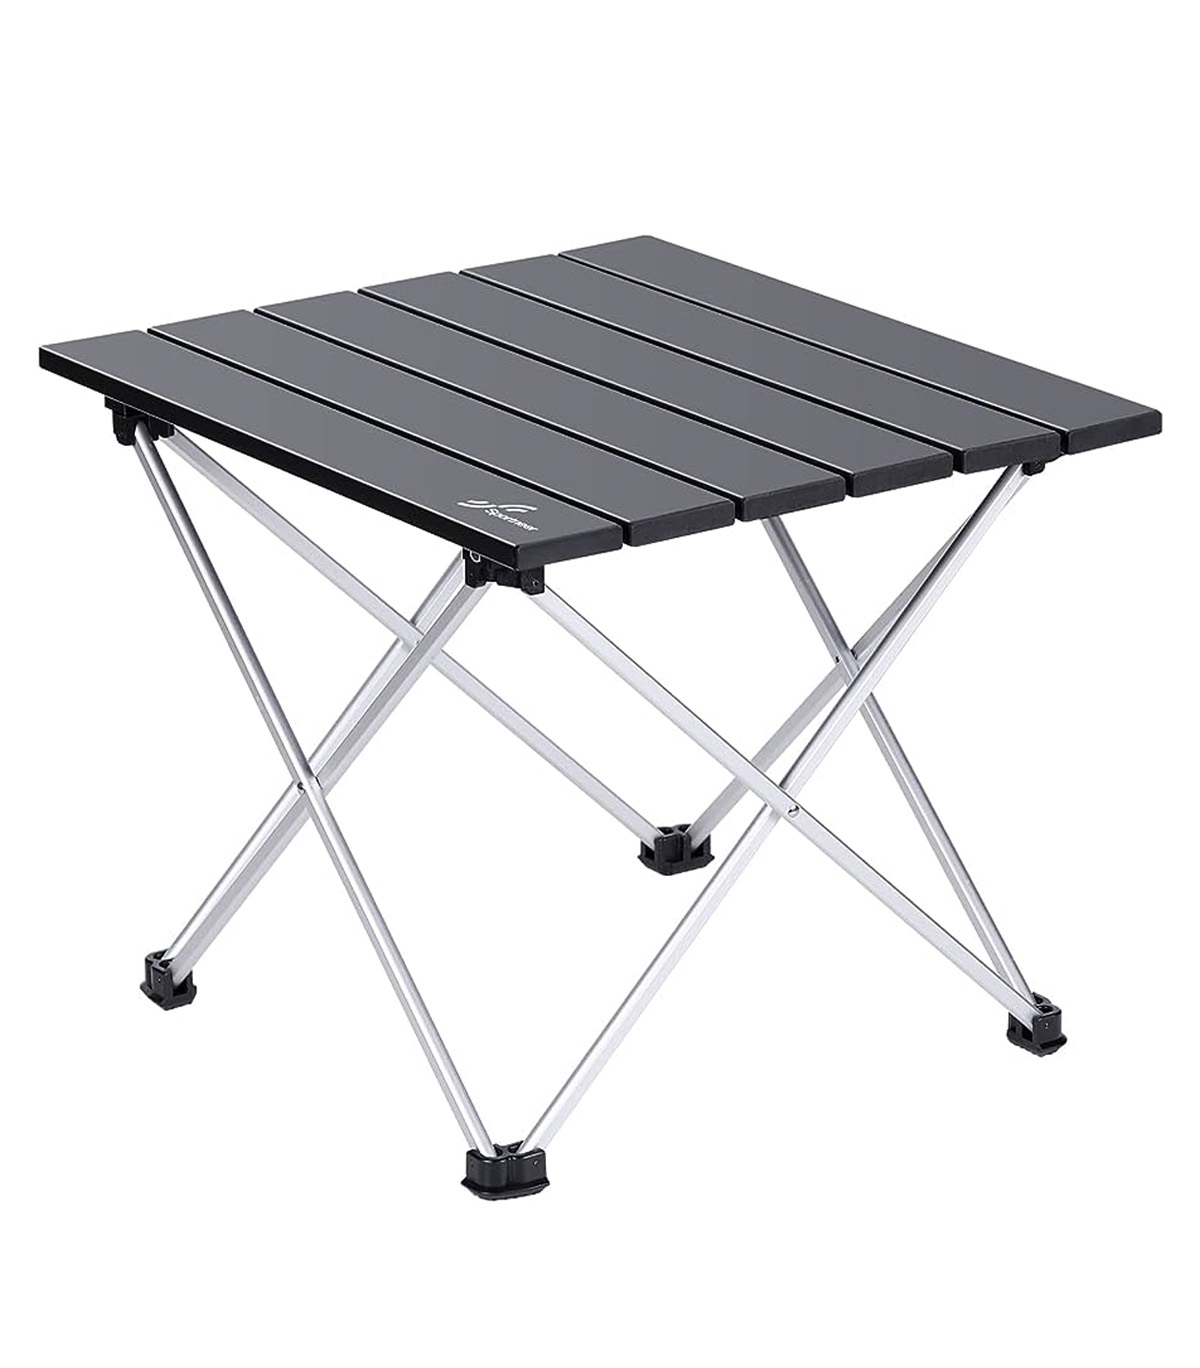 Portable tables